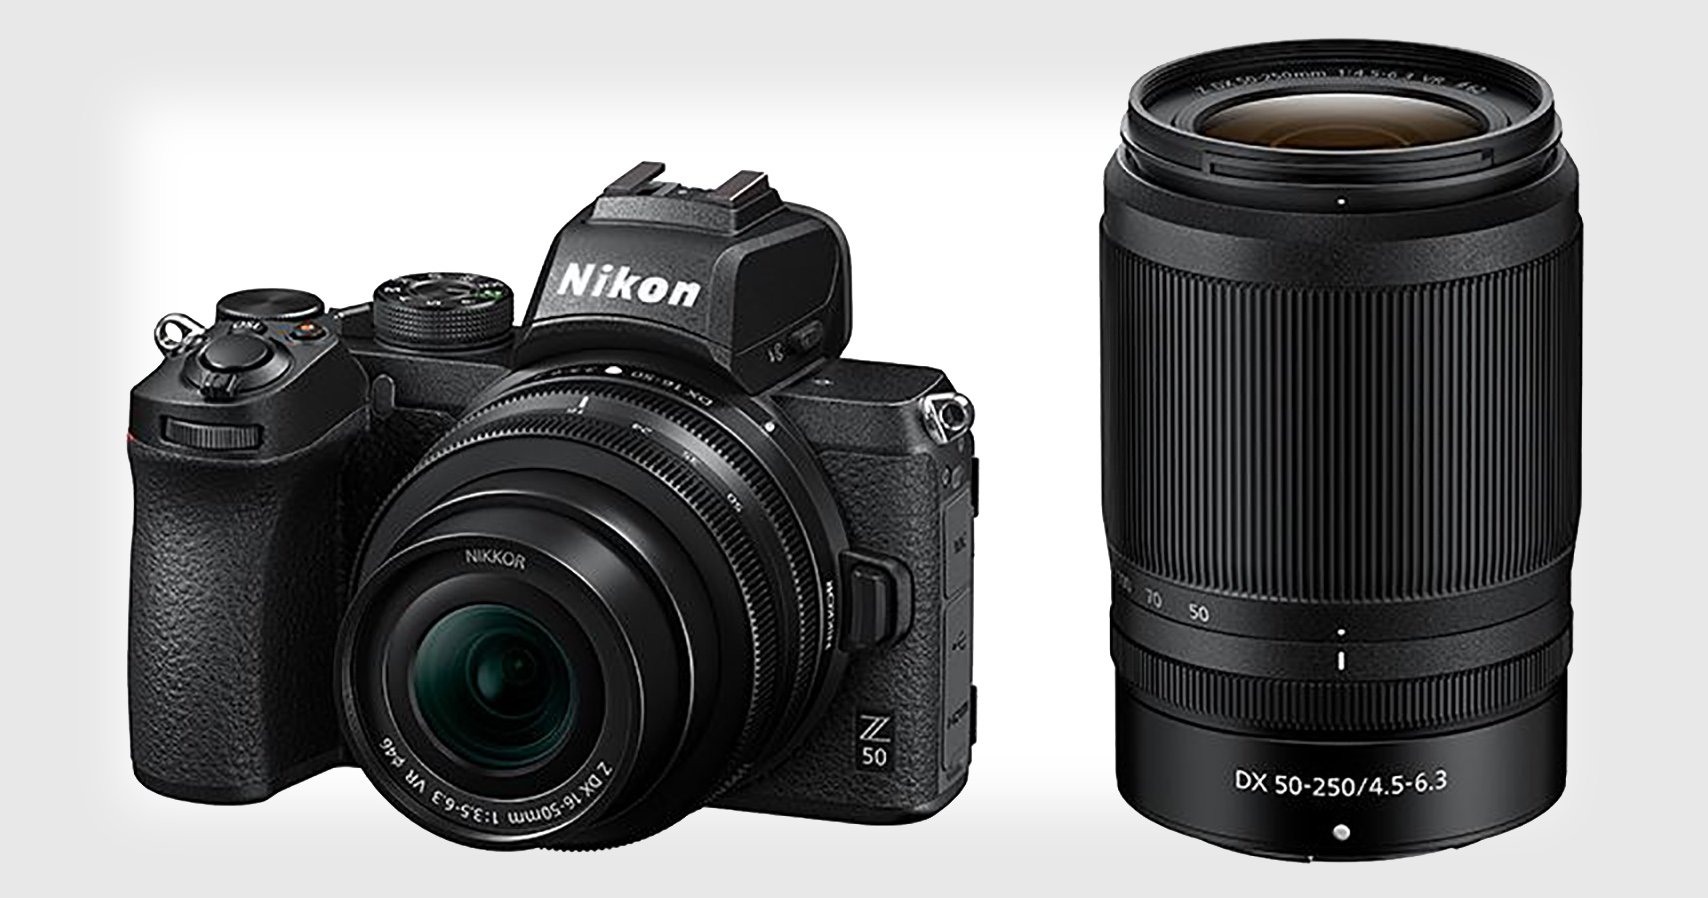  nikon z50 product photos leaked first 